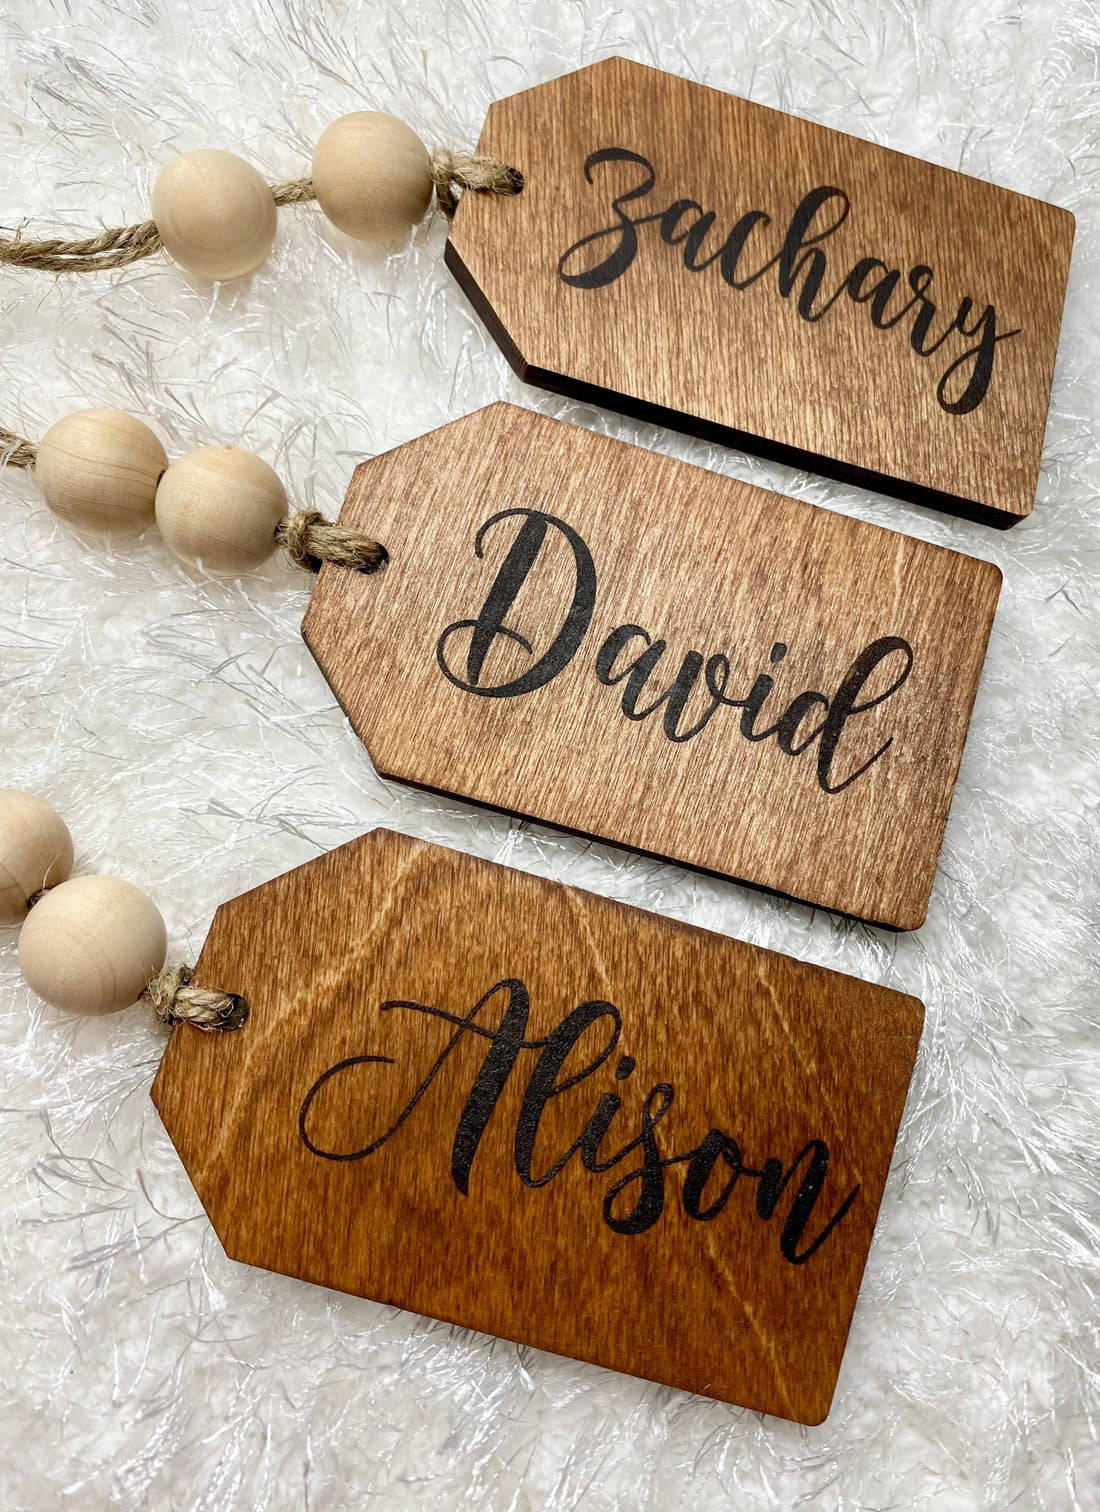 Personalized wooden gift tags, wood stocking tags, tiered tray decor,